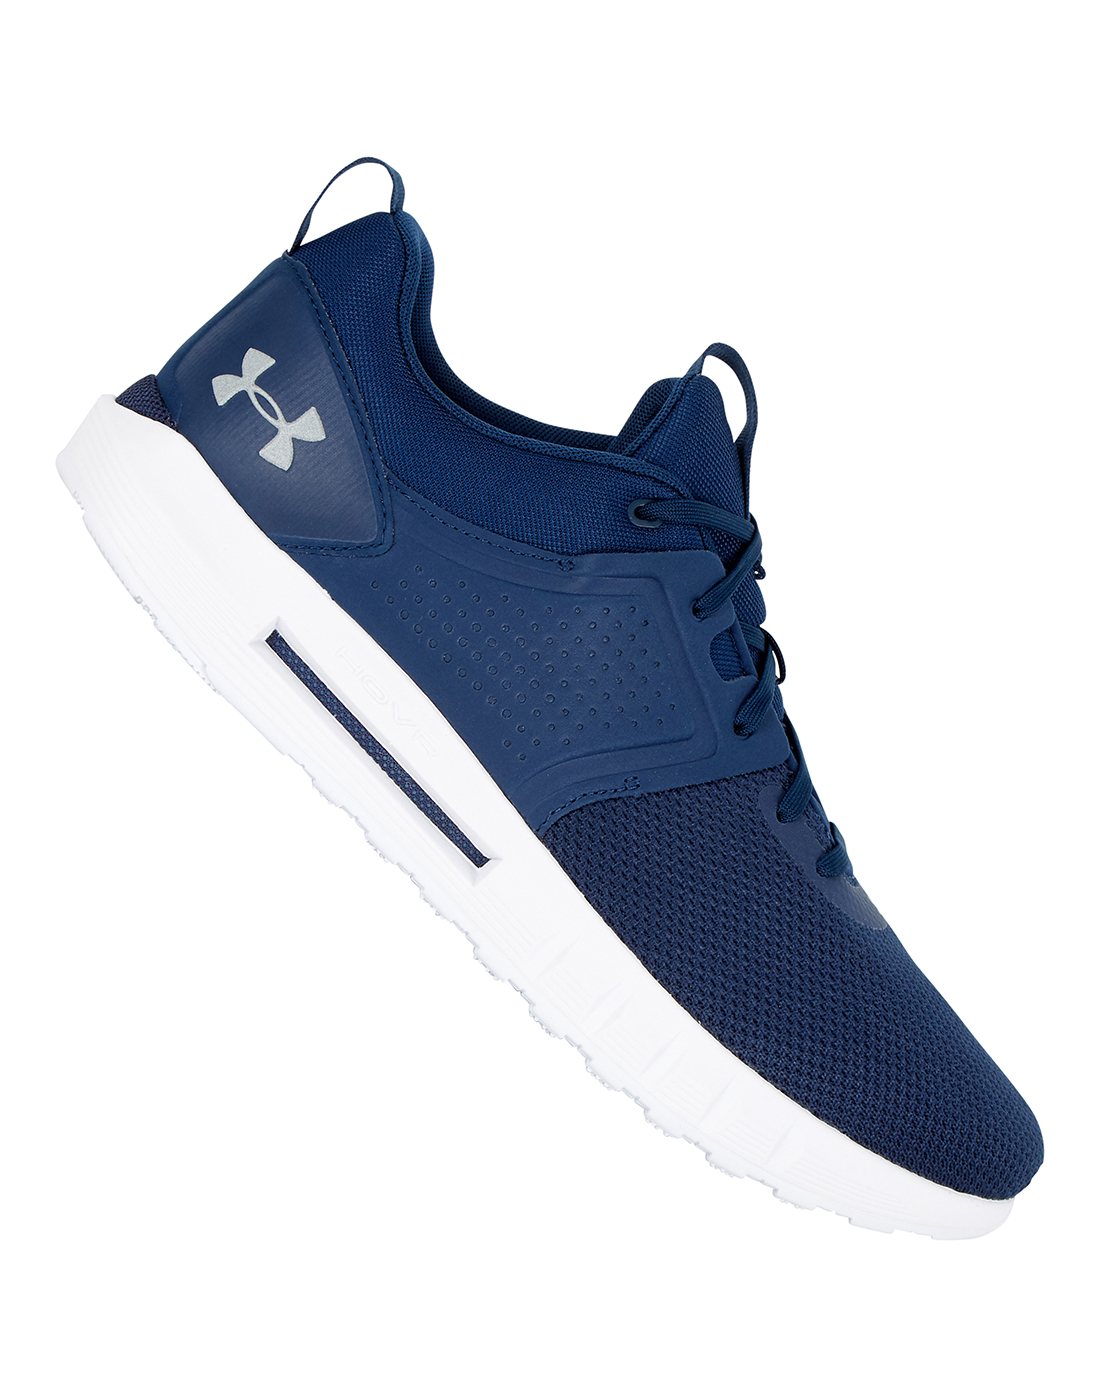 Under Armour Mens HOVR CT - Blue | Life Style Sports IE